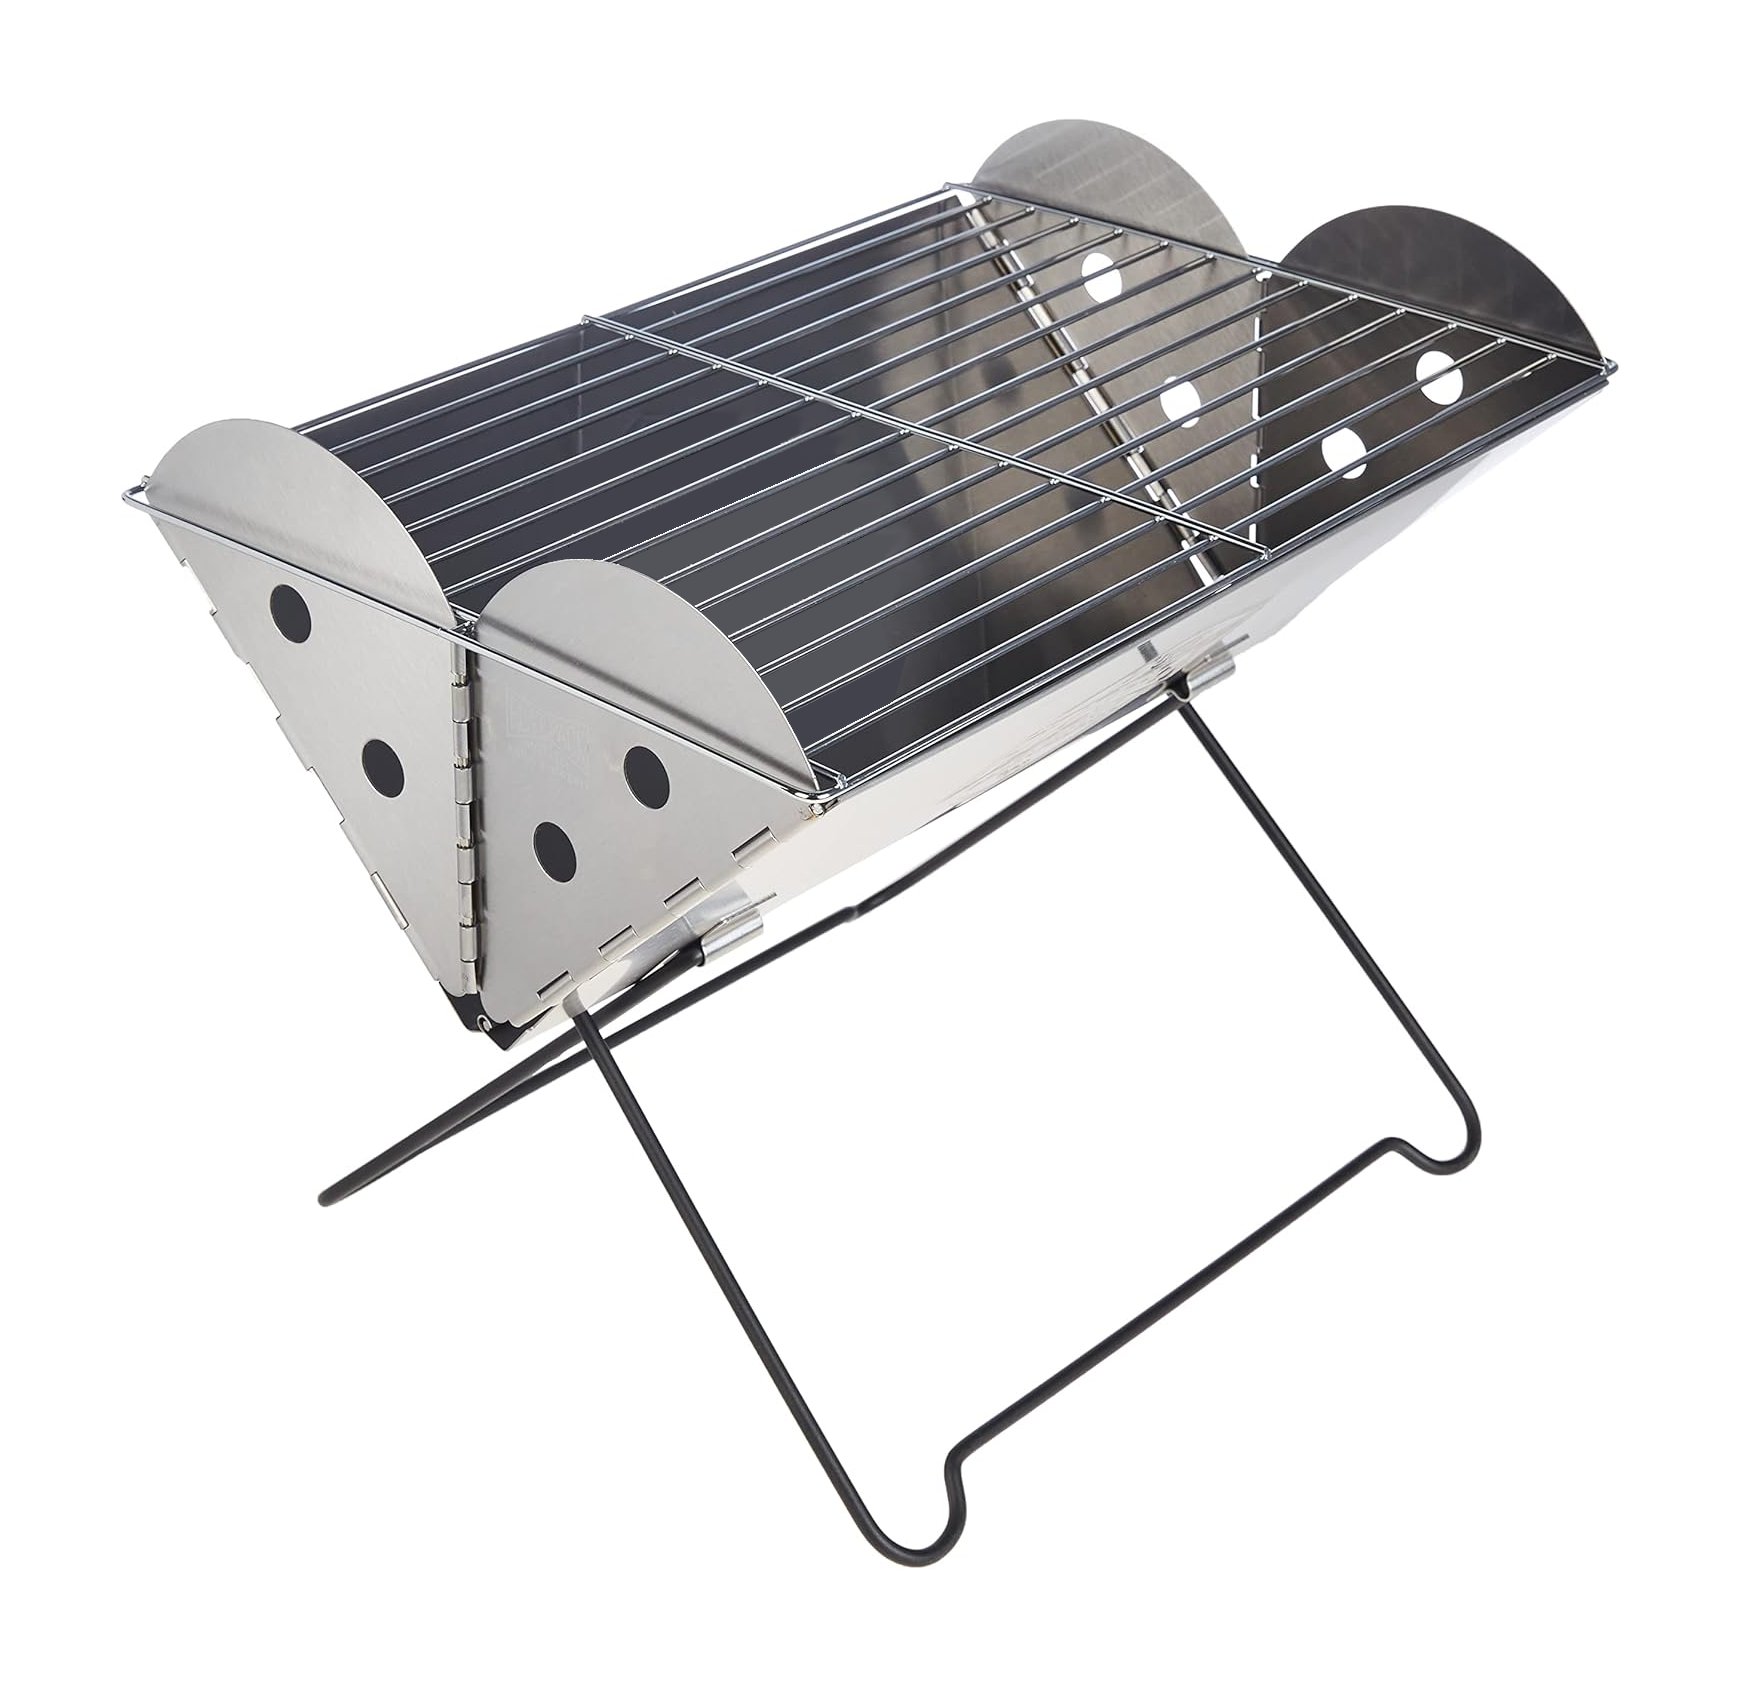 Flatpack Portable Stainless Steel Grill and Fire Pit